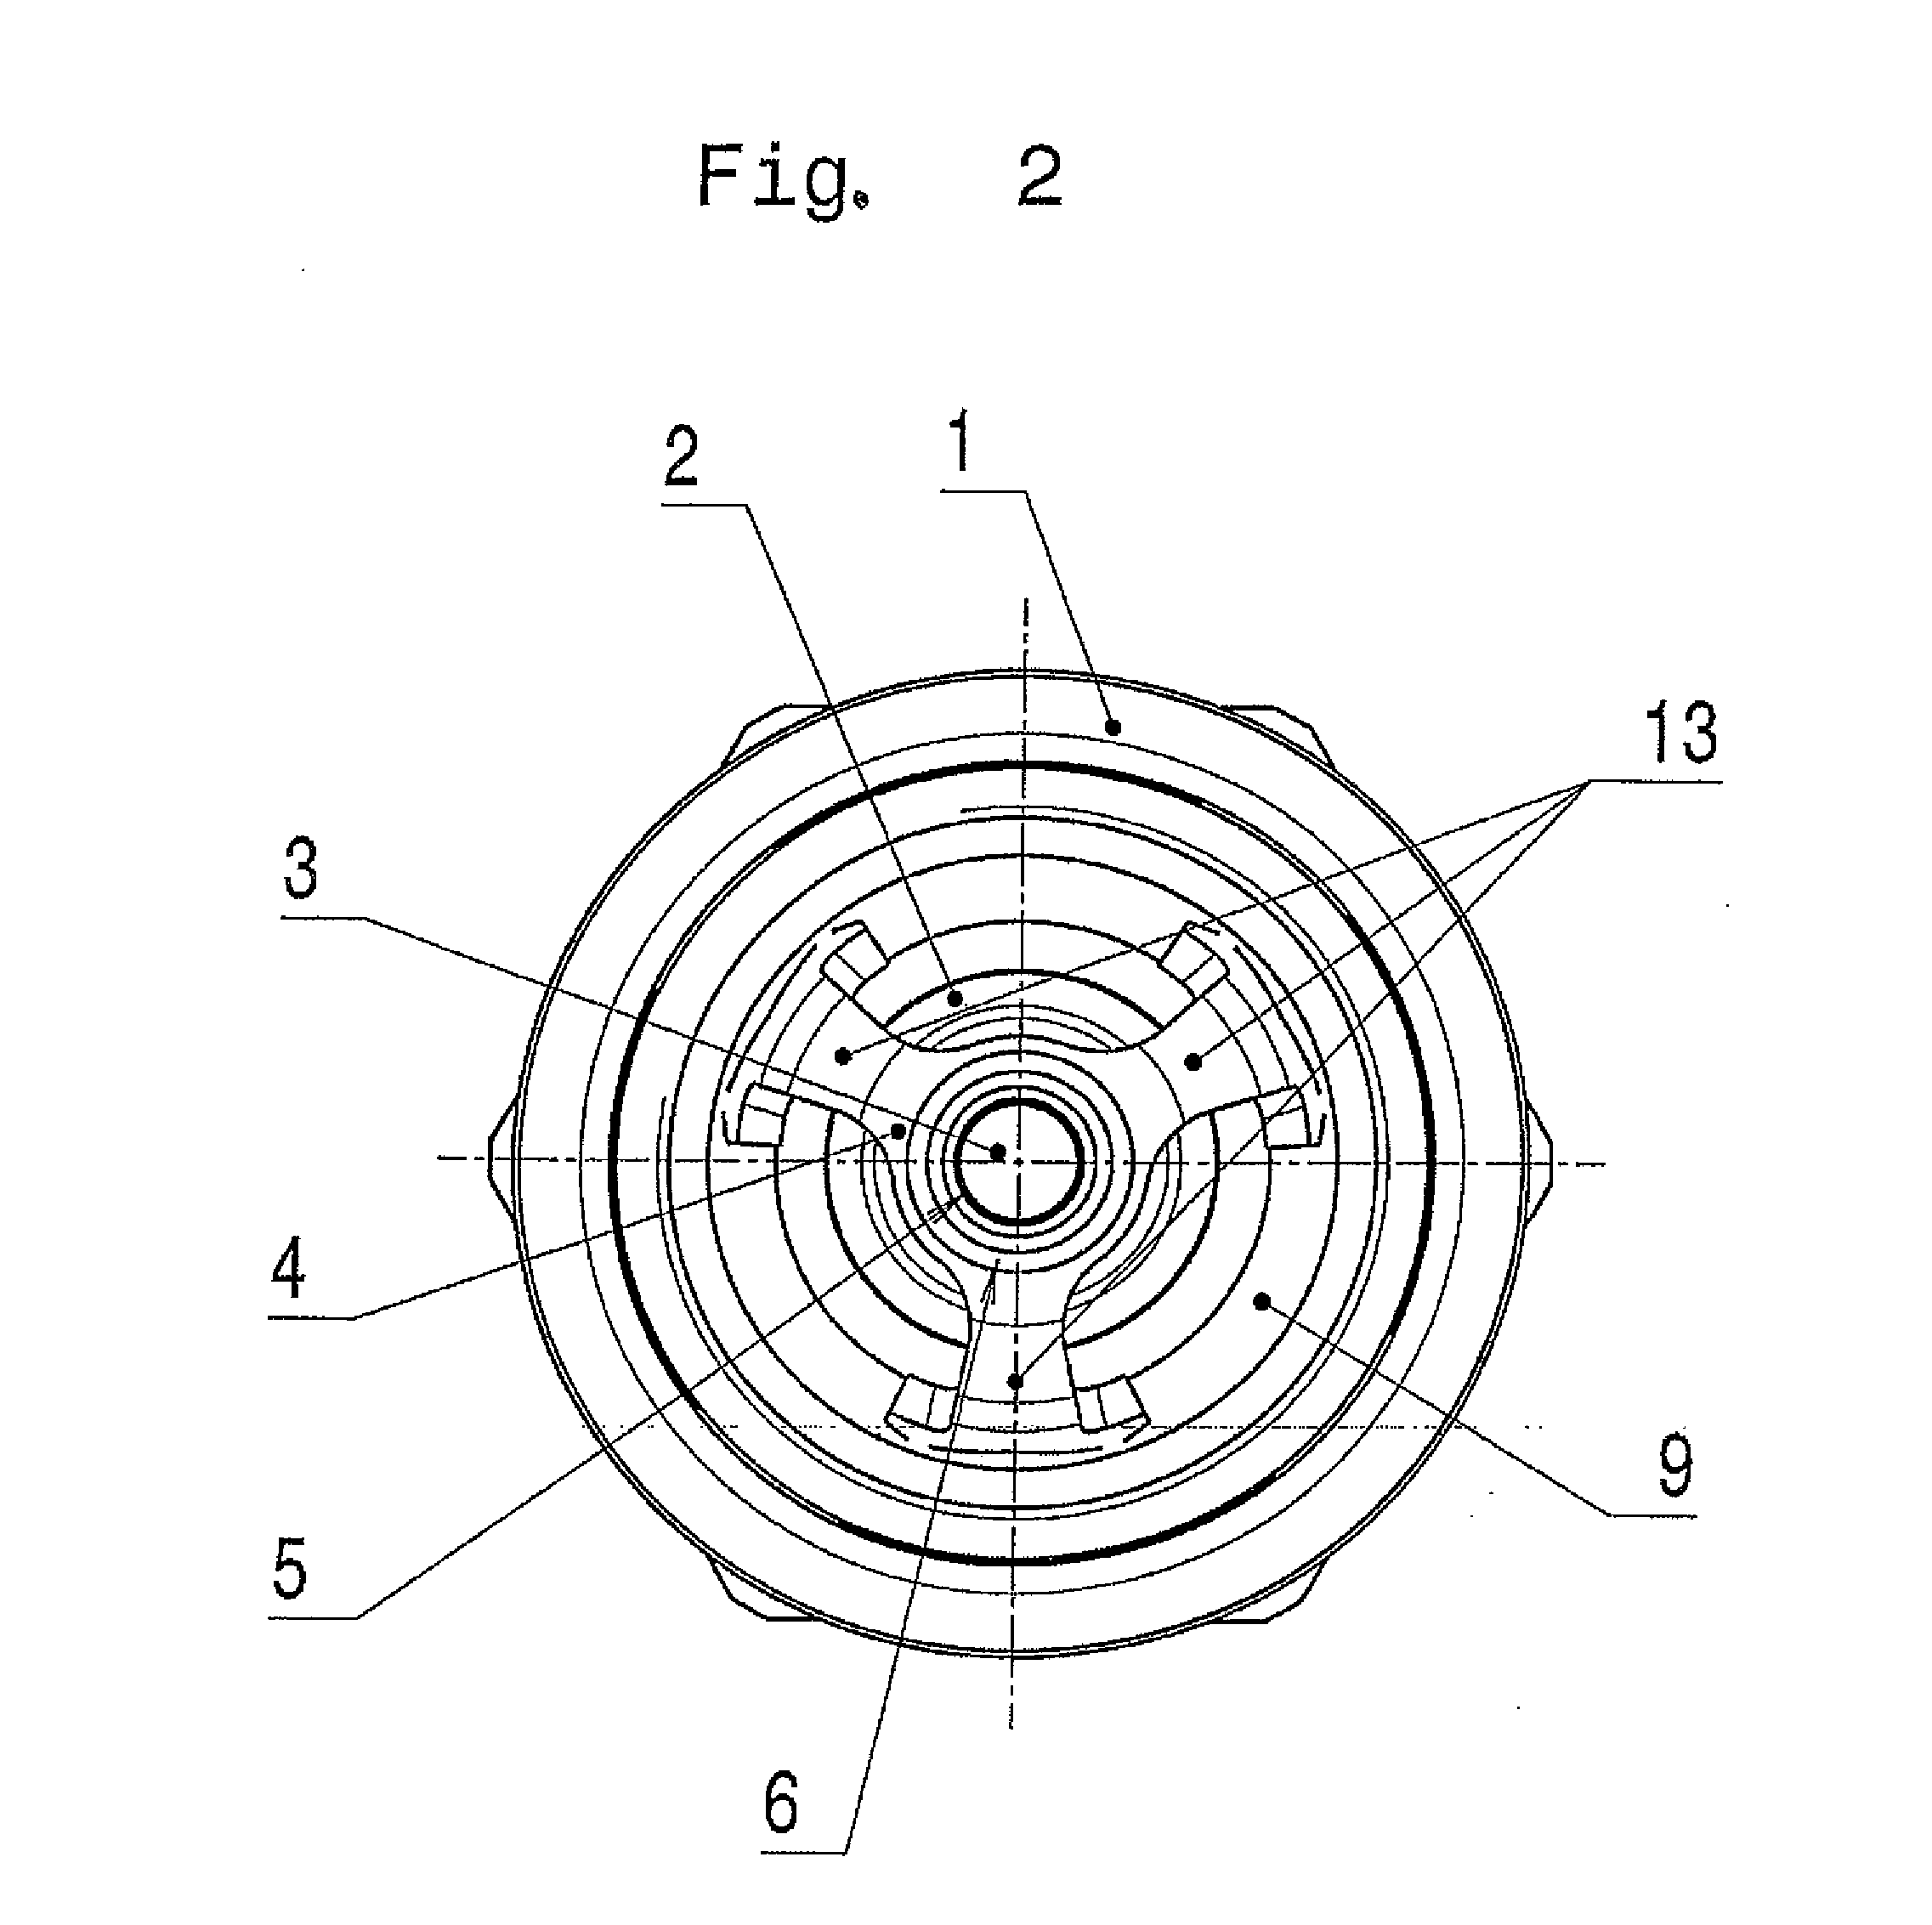 Spark Plug for a Gas-Operated Internal Combustion Engine